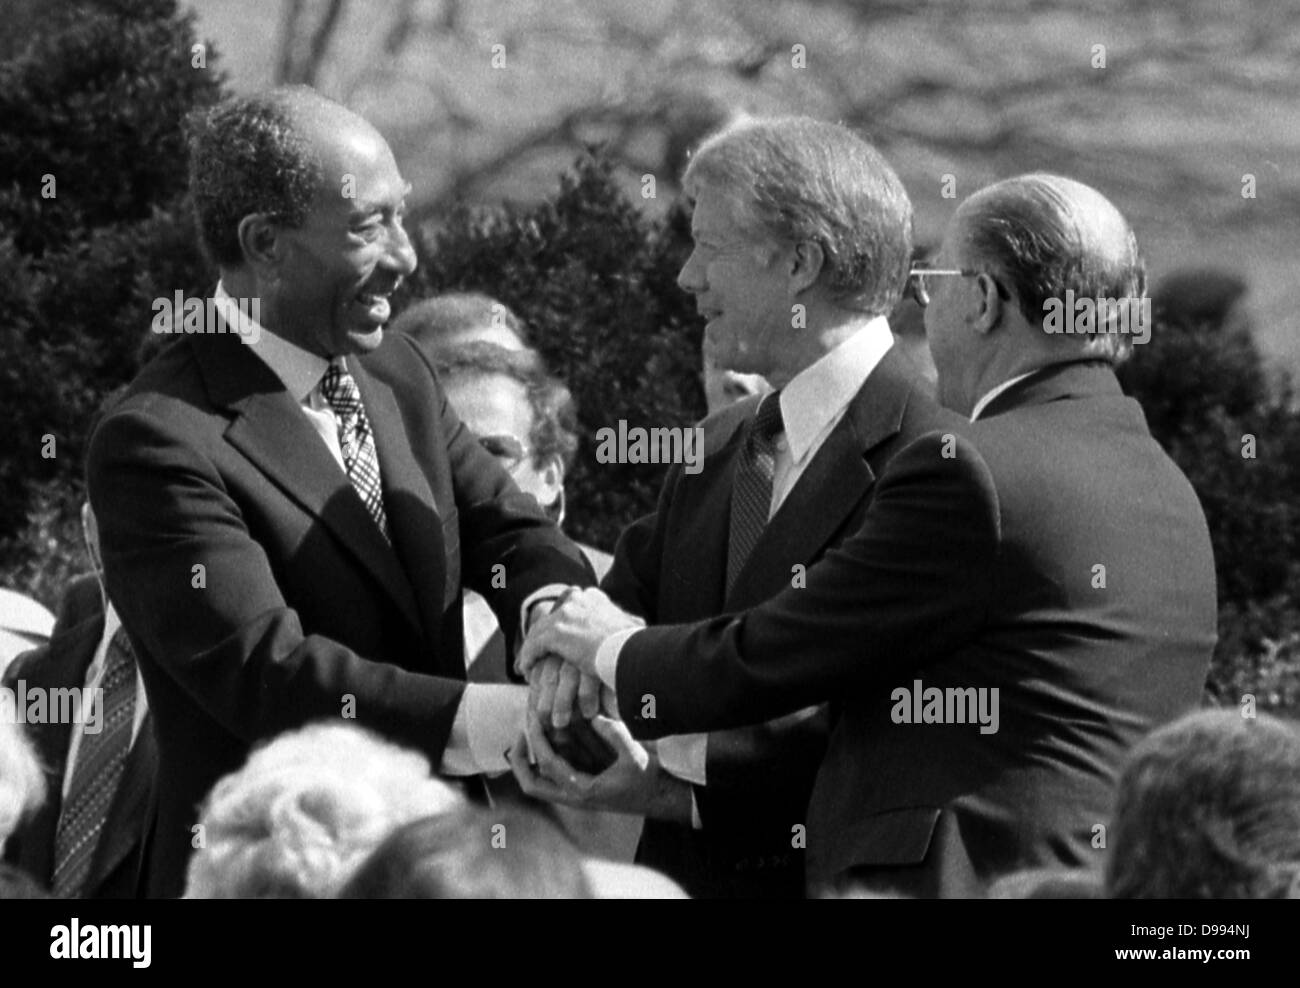 Egyptian President Anwar Sadat, US President Jimmy Carter and Israeli Prime Minister Menachem Begin shake hands at the time of the Peace treaty between Israel and Egypt in 1979 Stock Photo